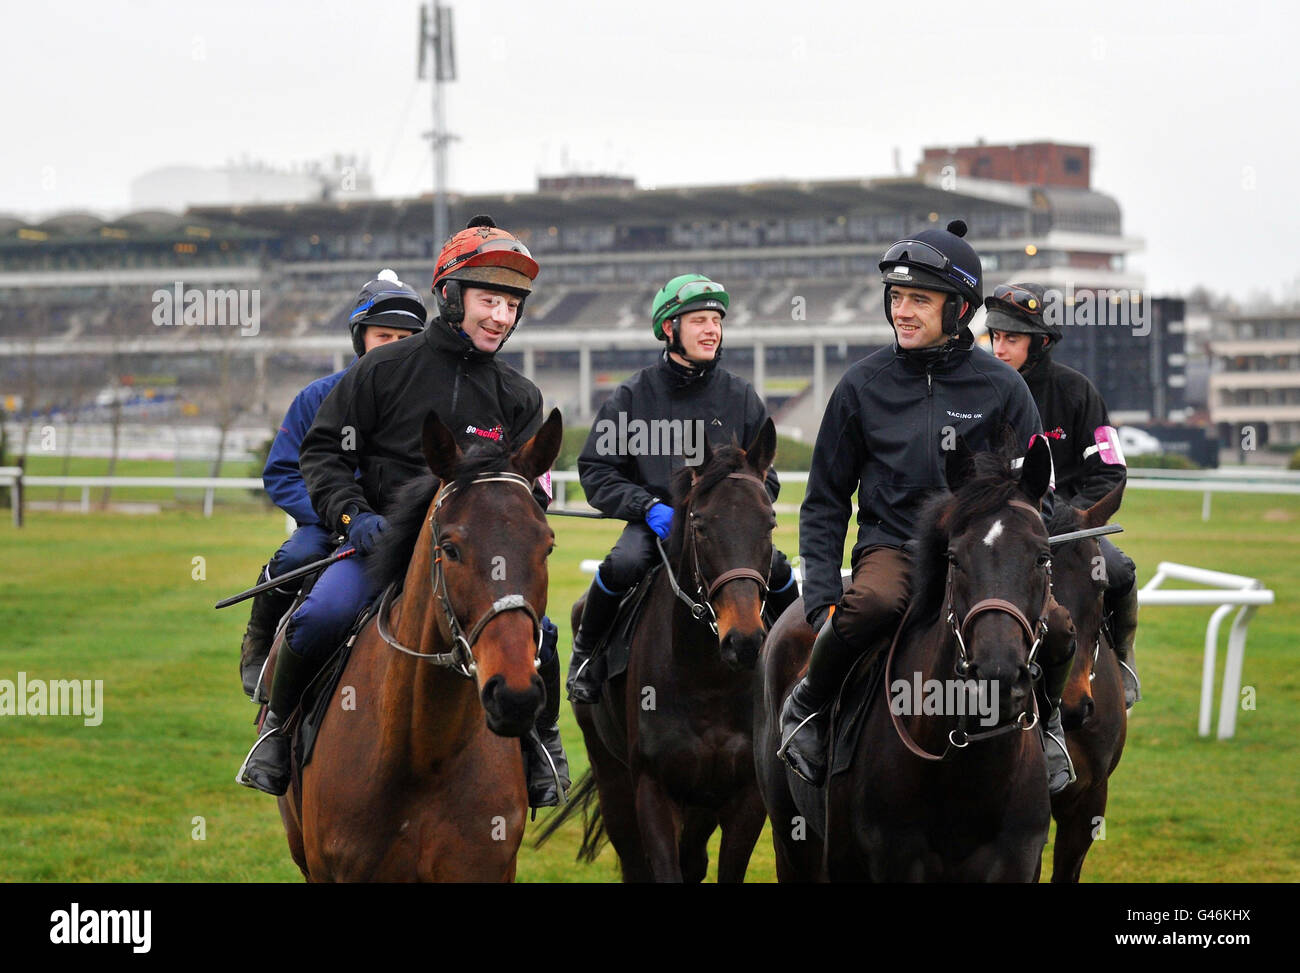 Ruby Walsh (right) rides Final Approach with other horses of trainer Willie Mullins' on the gallops ahead of the Gold Cup Day at Cheltenham Racecourse. Stock Photo